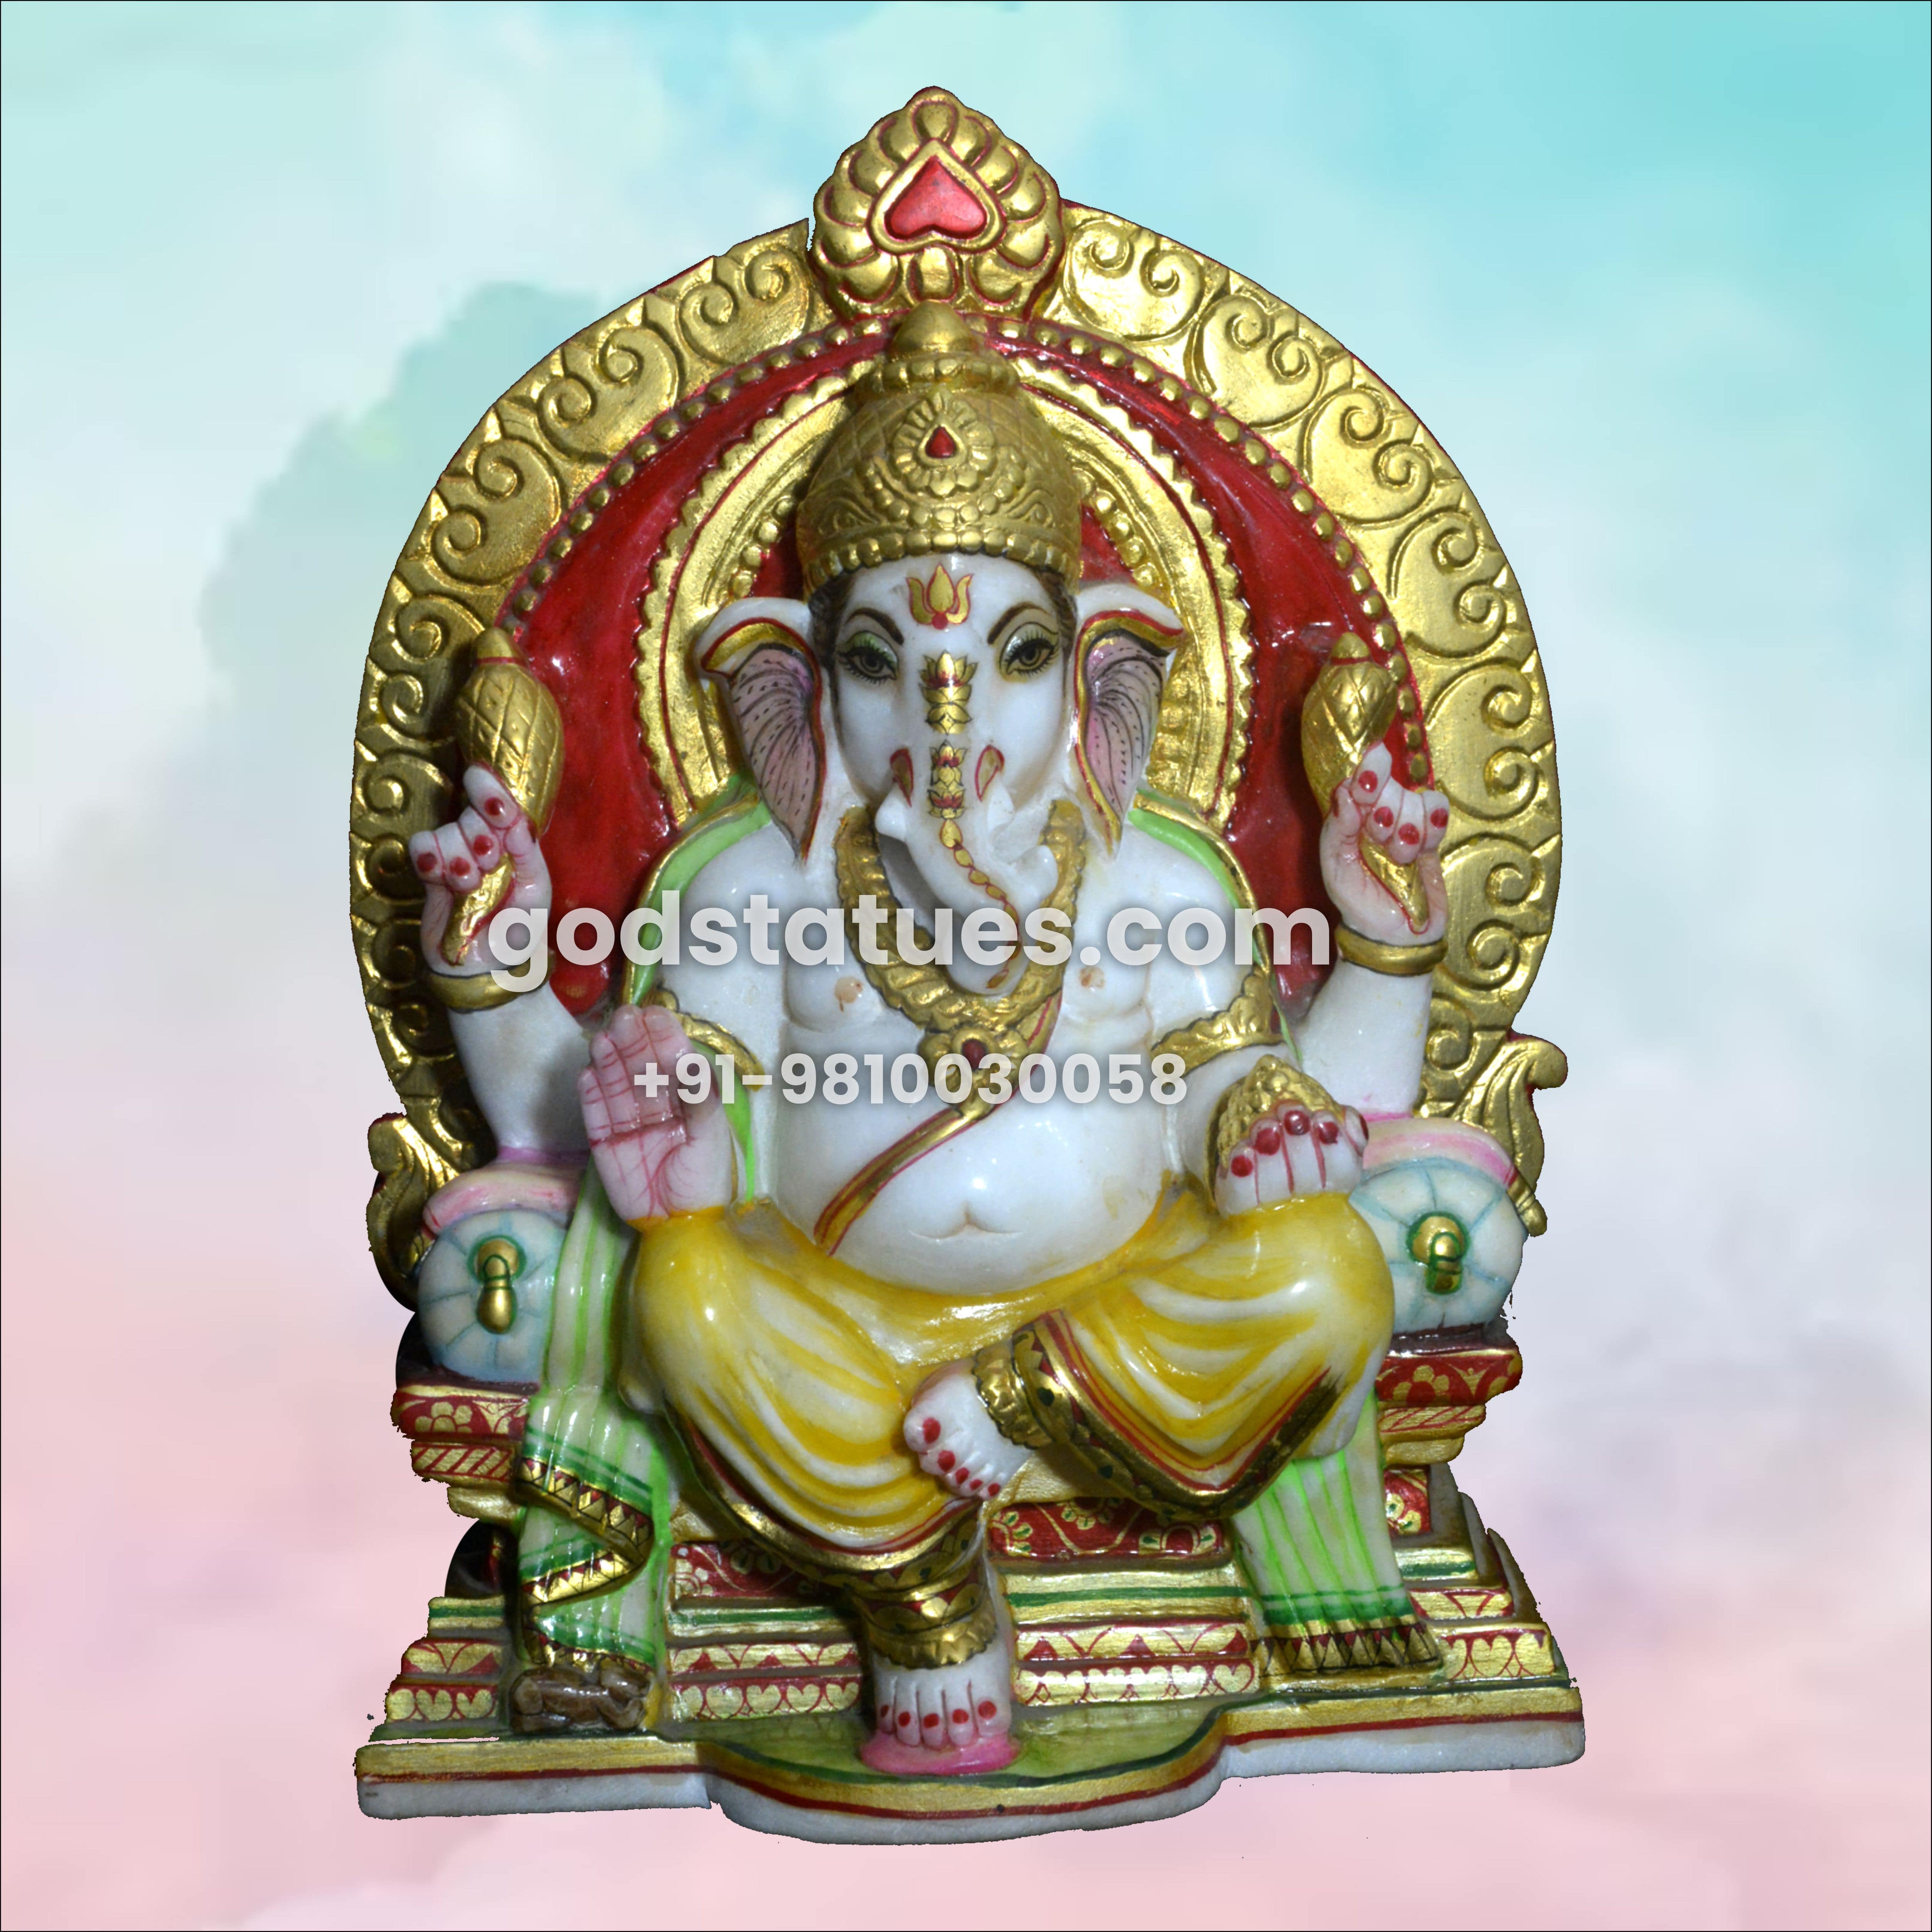 Ganesha Marble Statue sitting on a Thrown God Statues